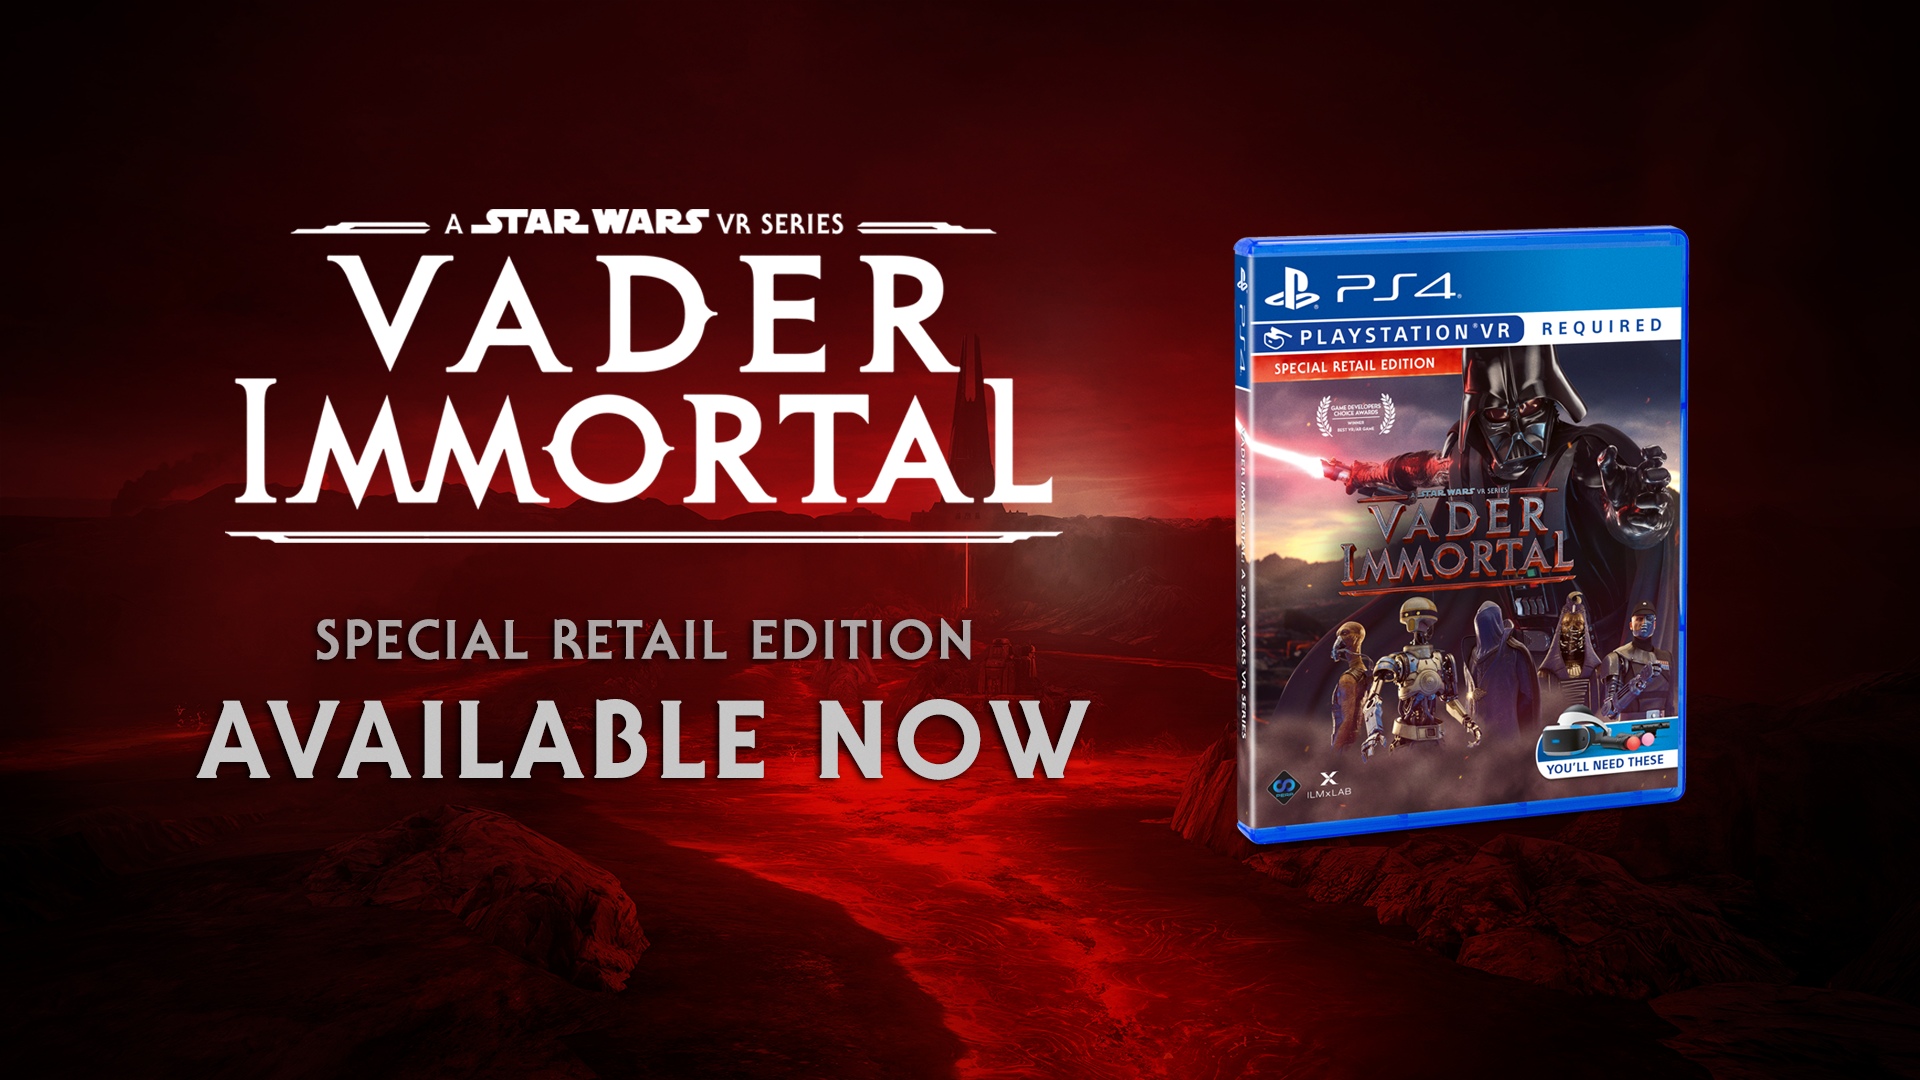 Vader Immortal Releases Physically for The First Time Ever!